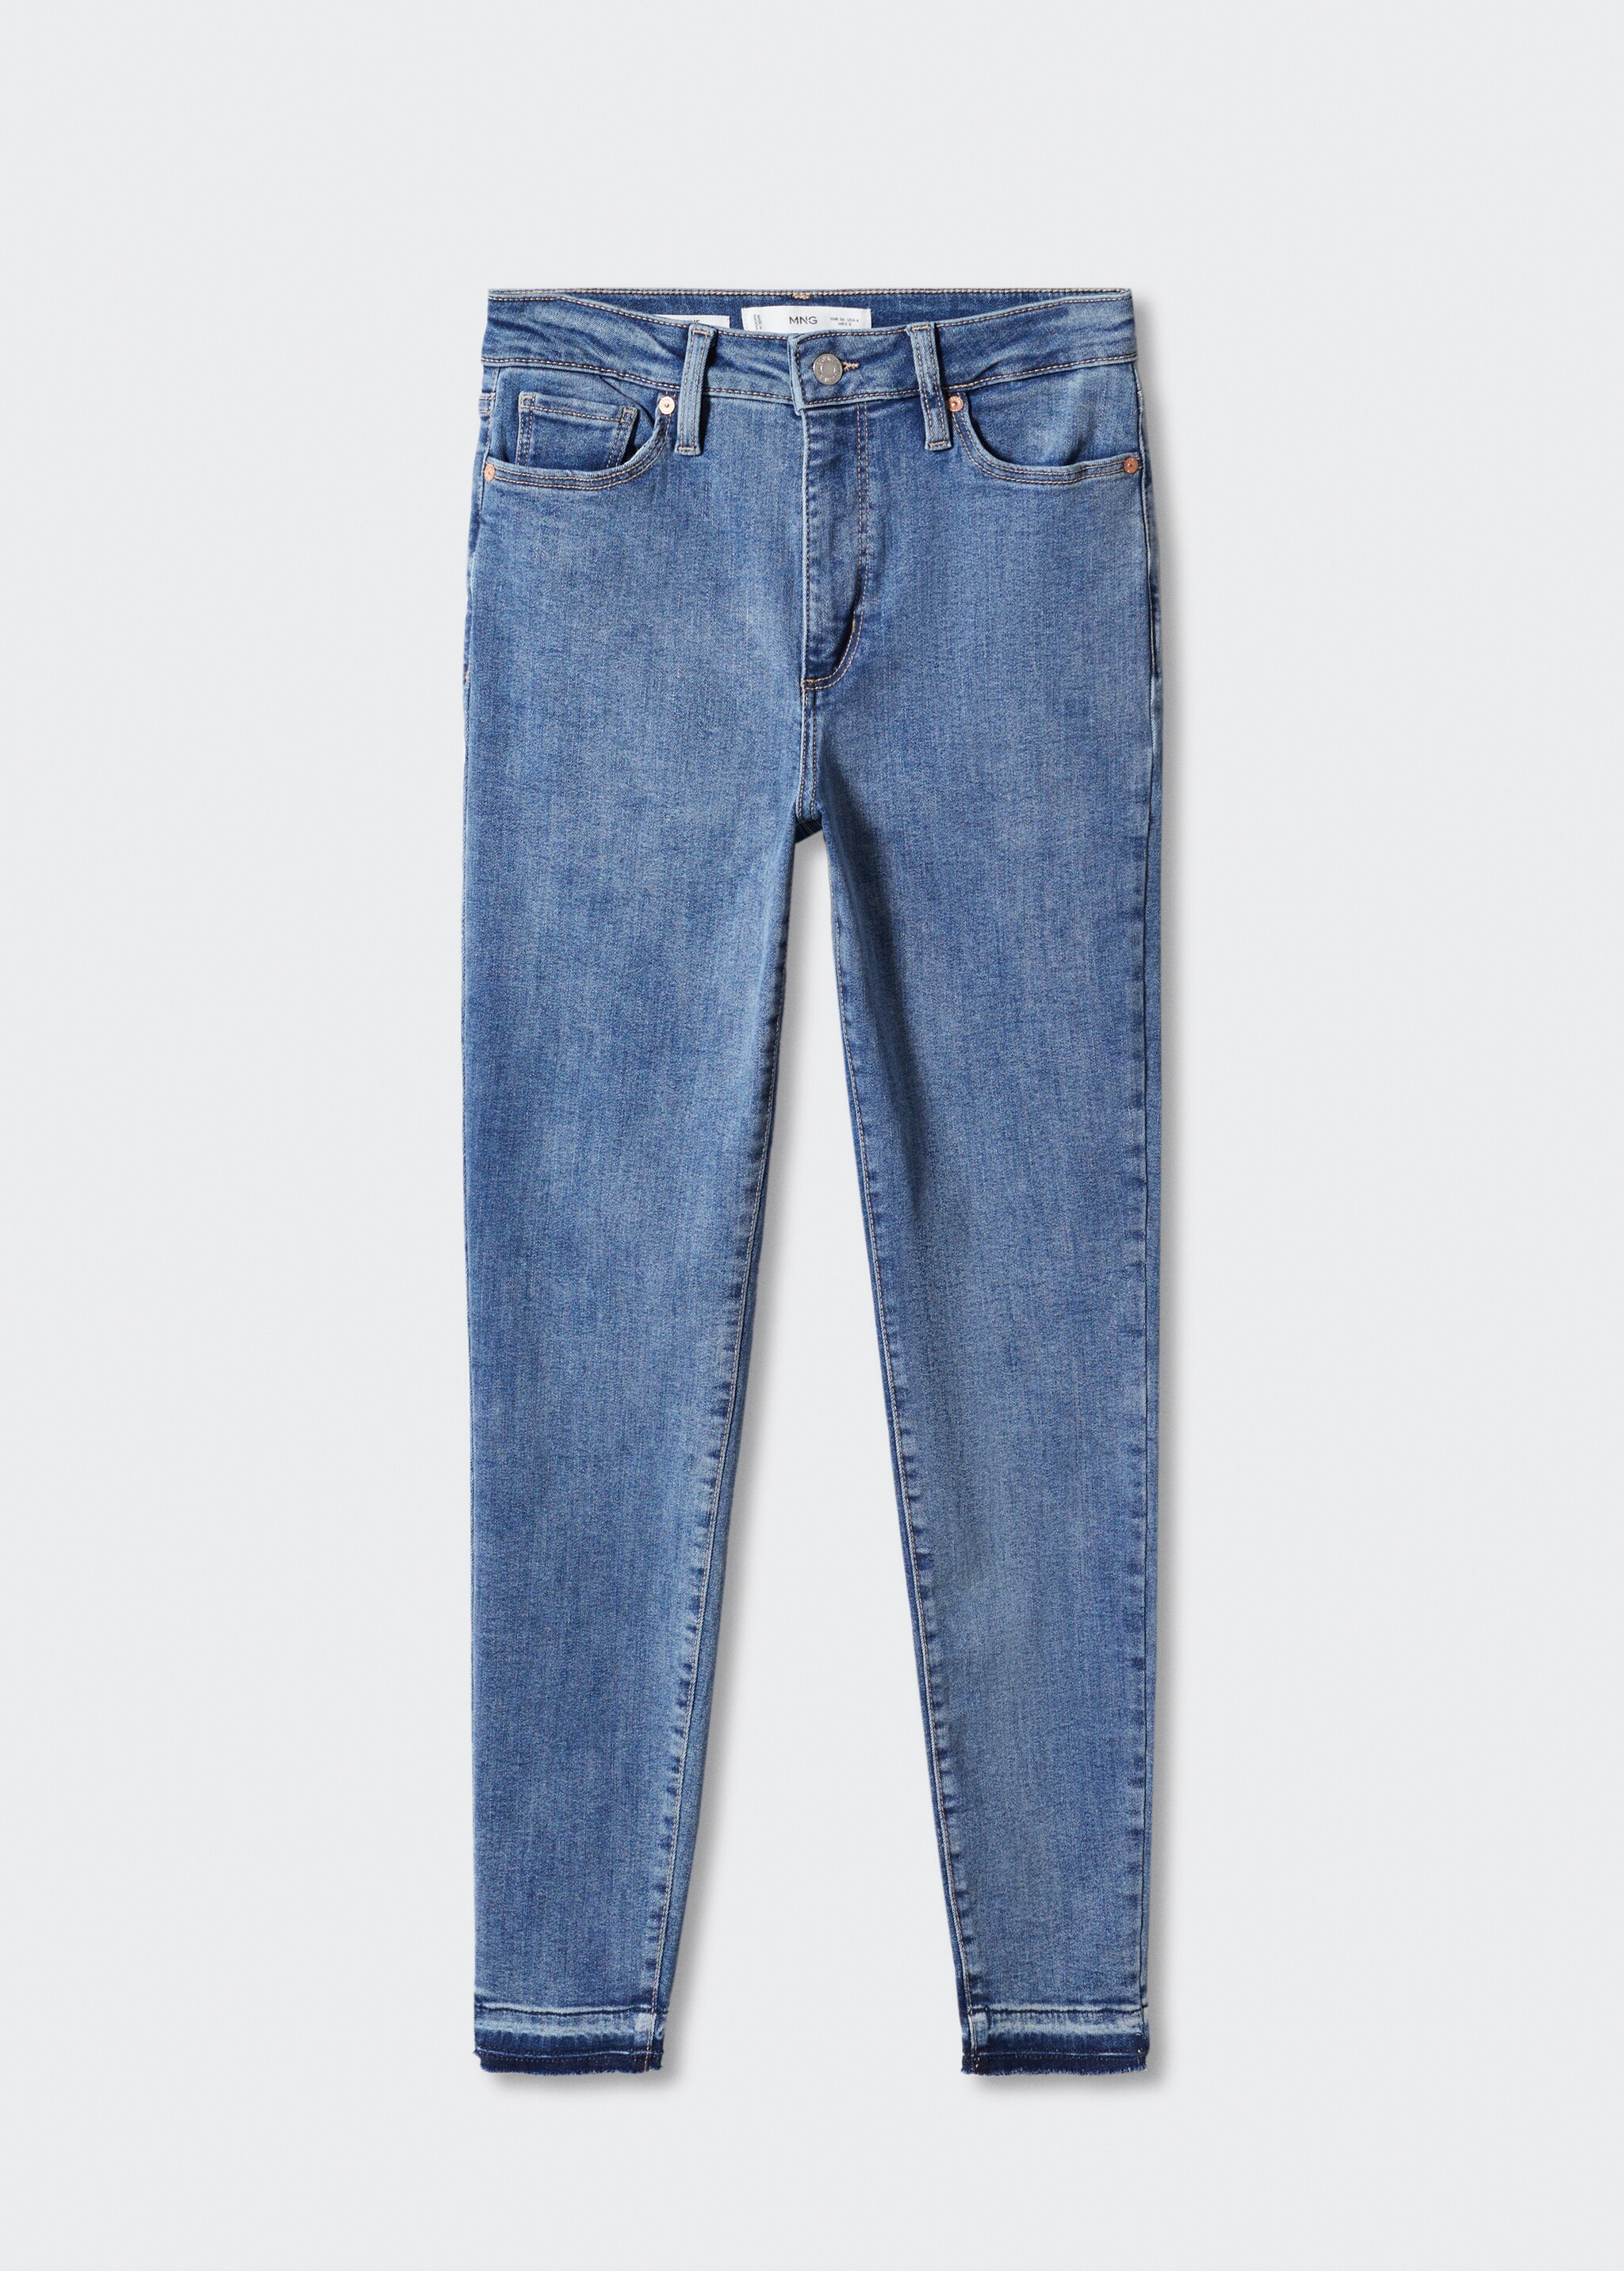 High-rise skinny jeans - Article without model